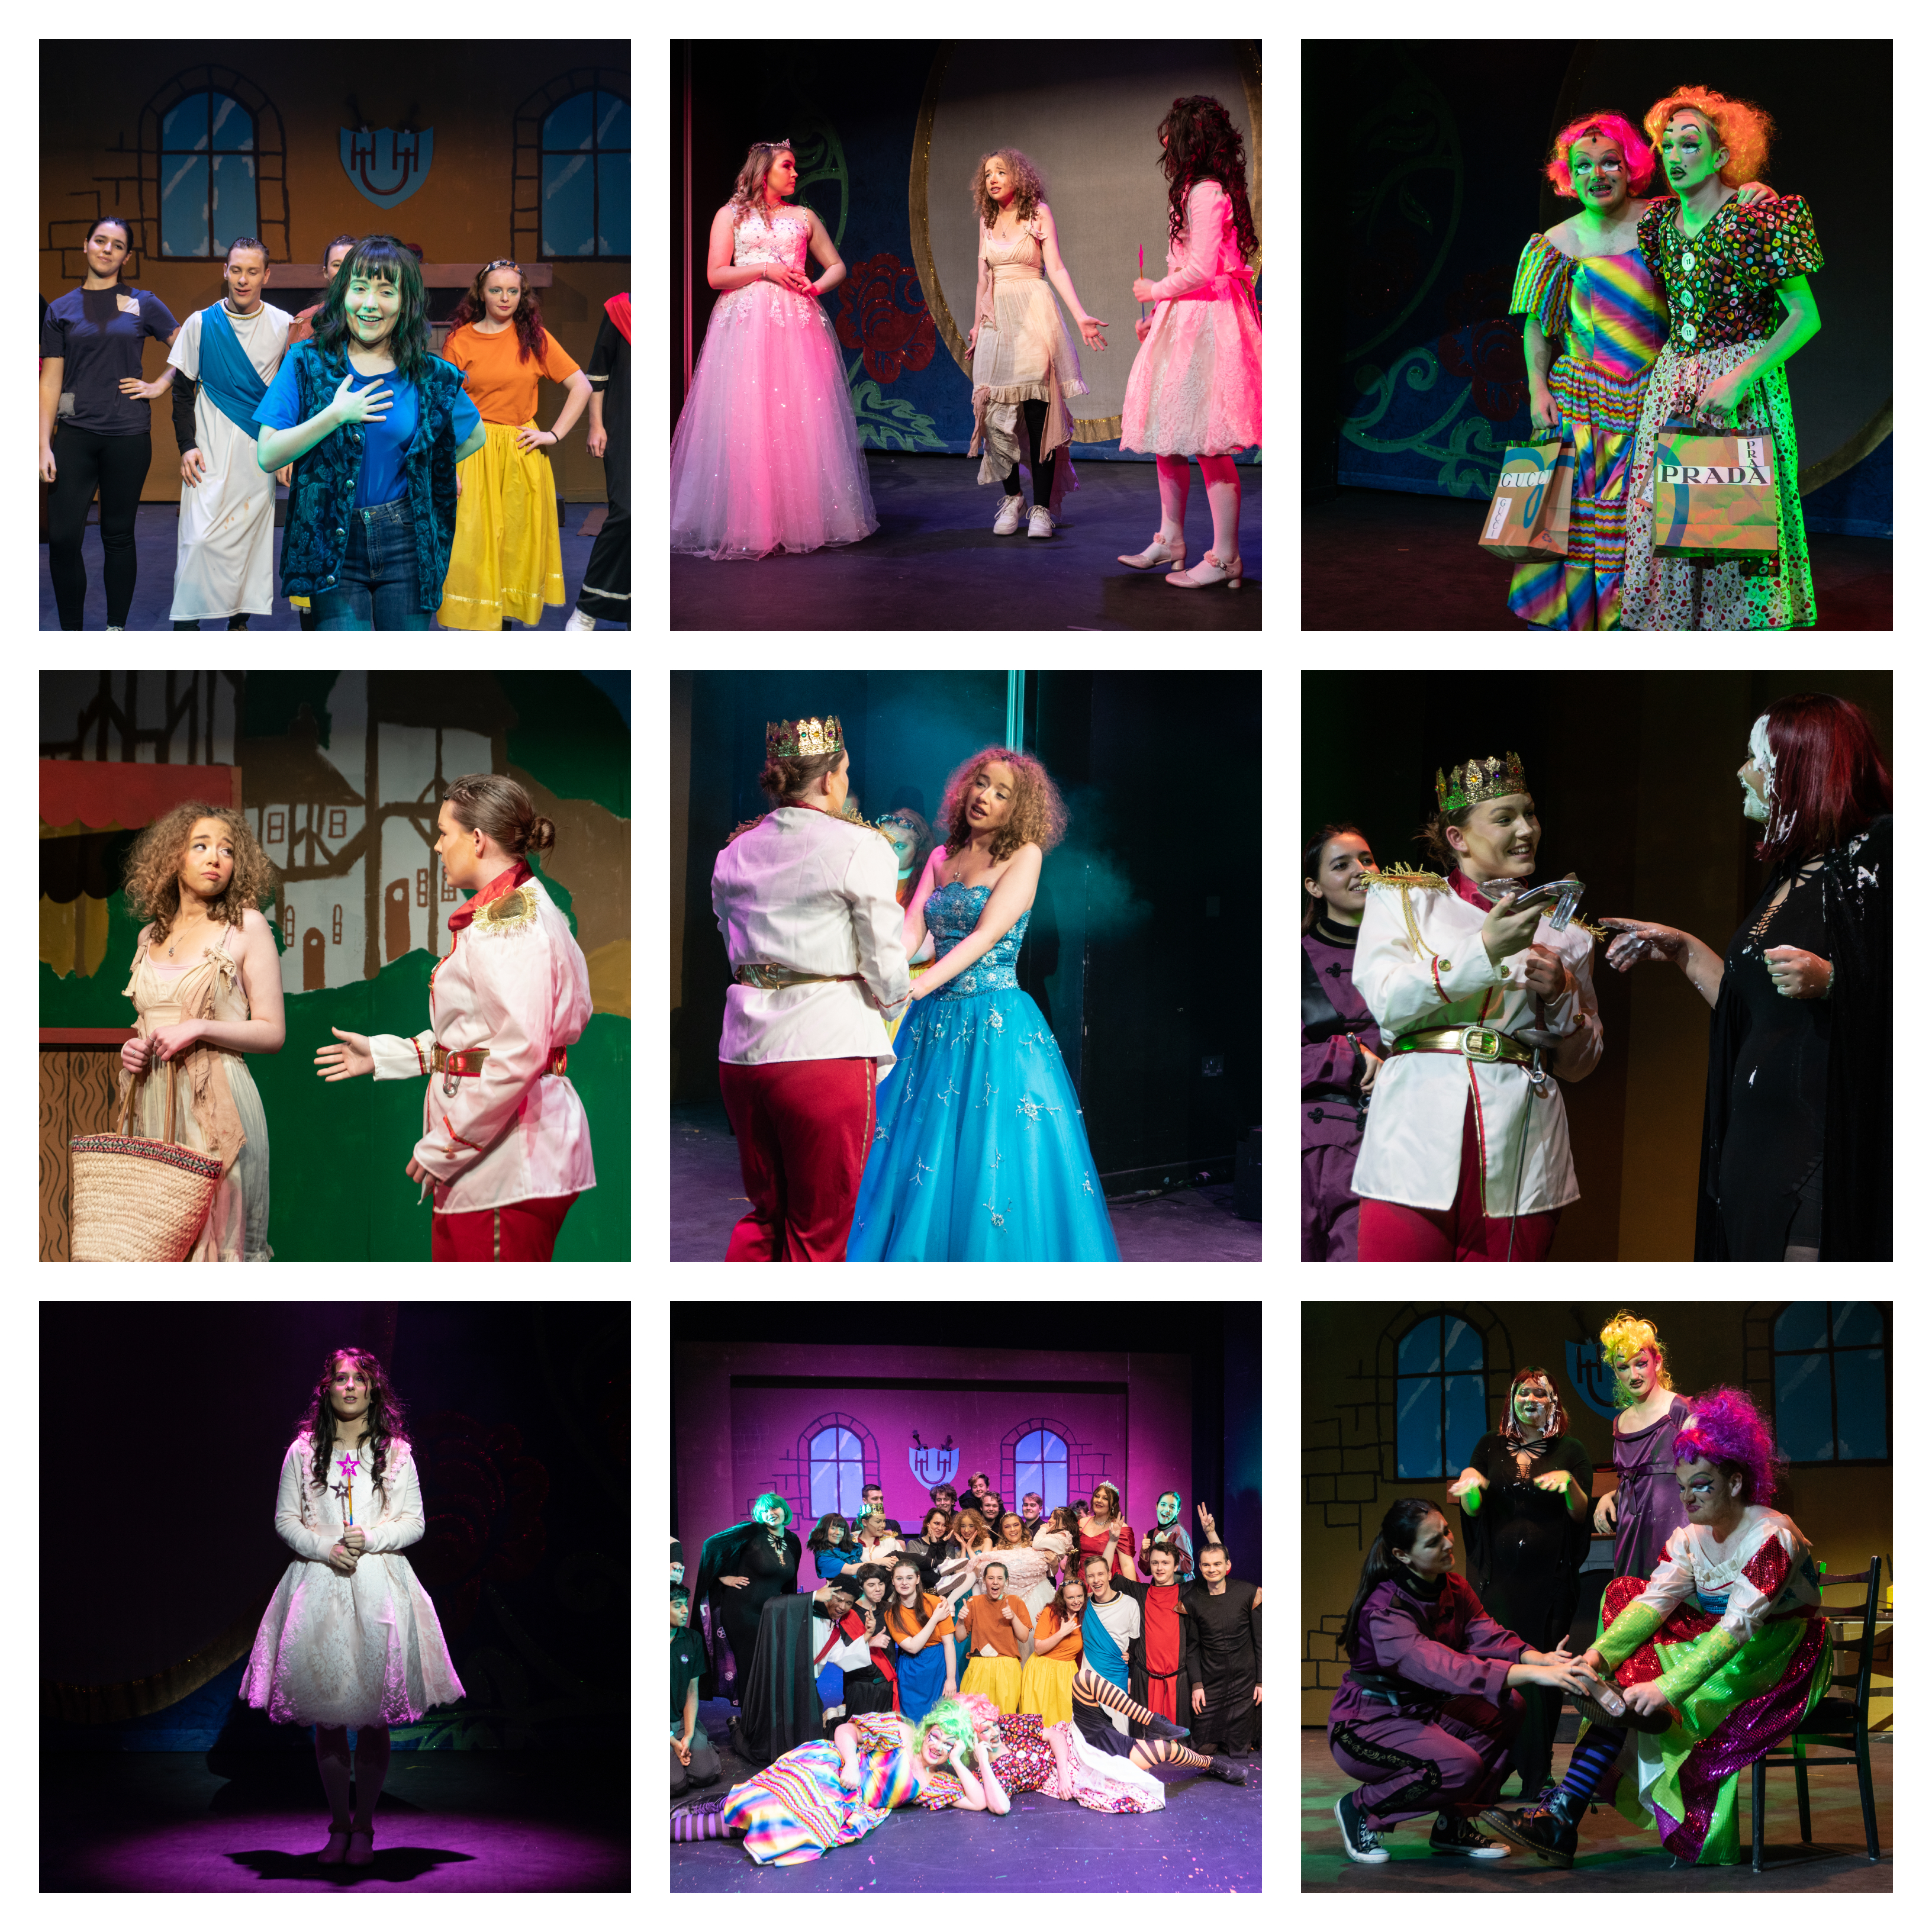 Collage of images from the show, including Cinderella with the fairy godmother, a group dance routine, Cinderella in her rags talking to the prince and a group photo of the full cast in costume